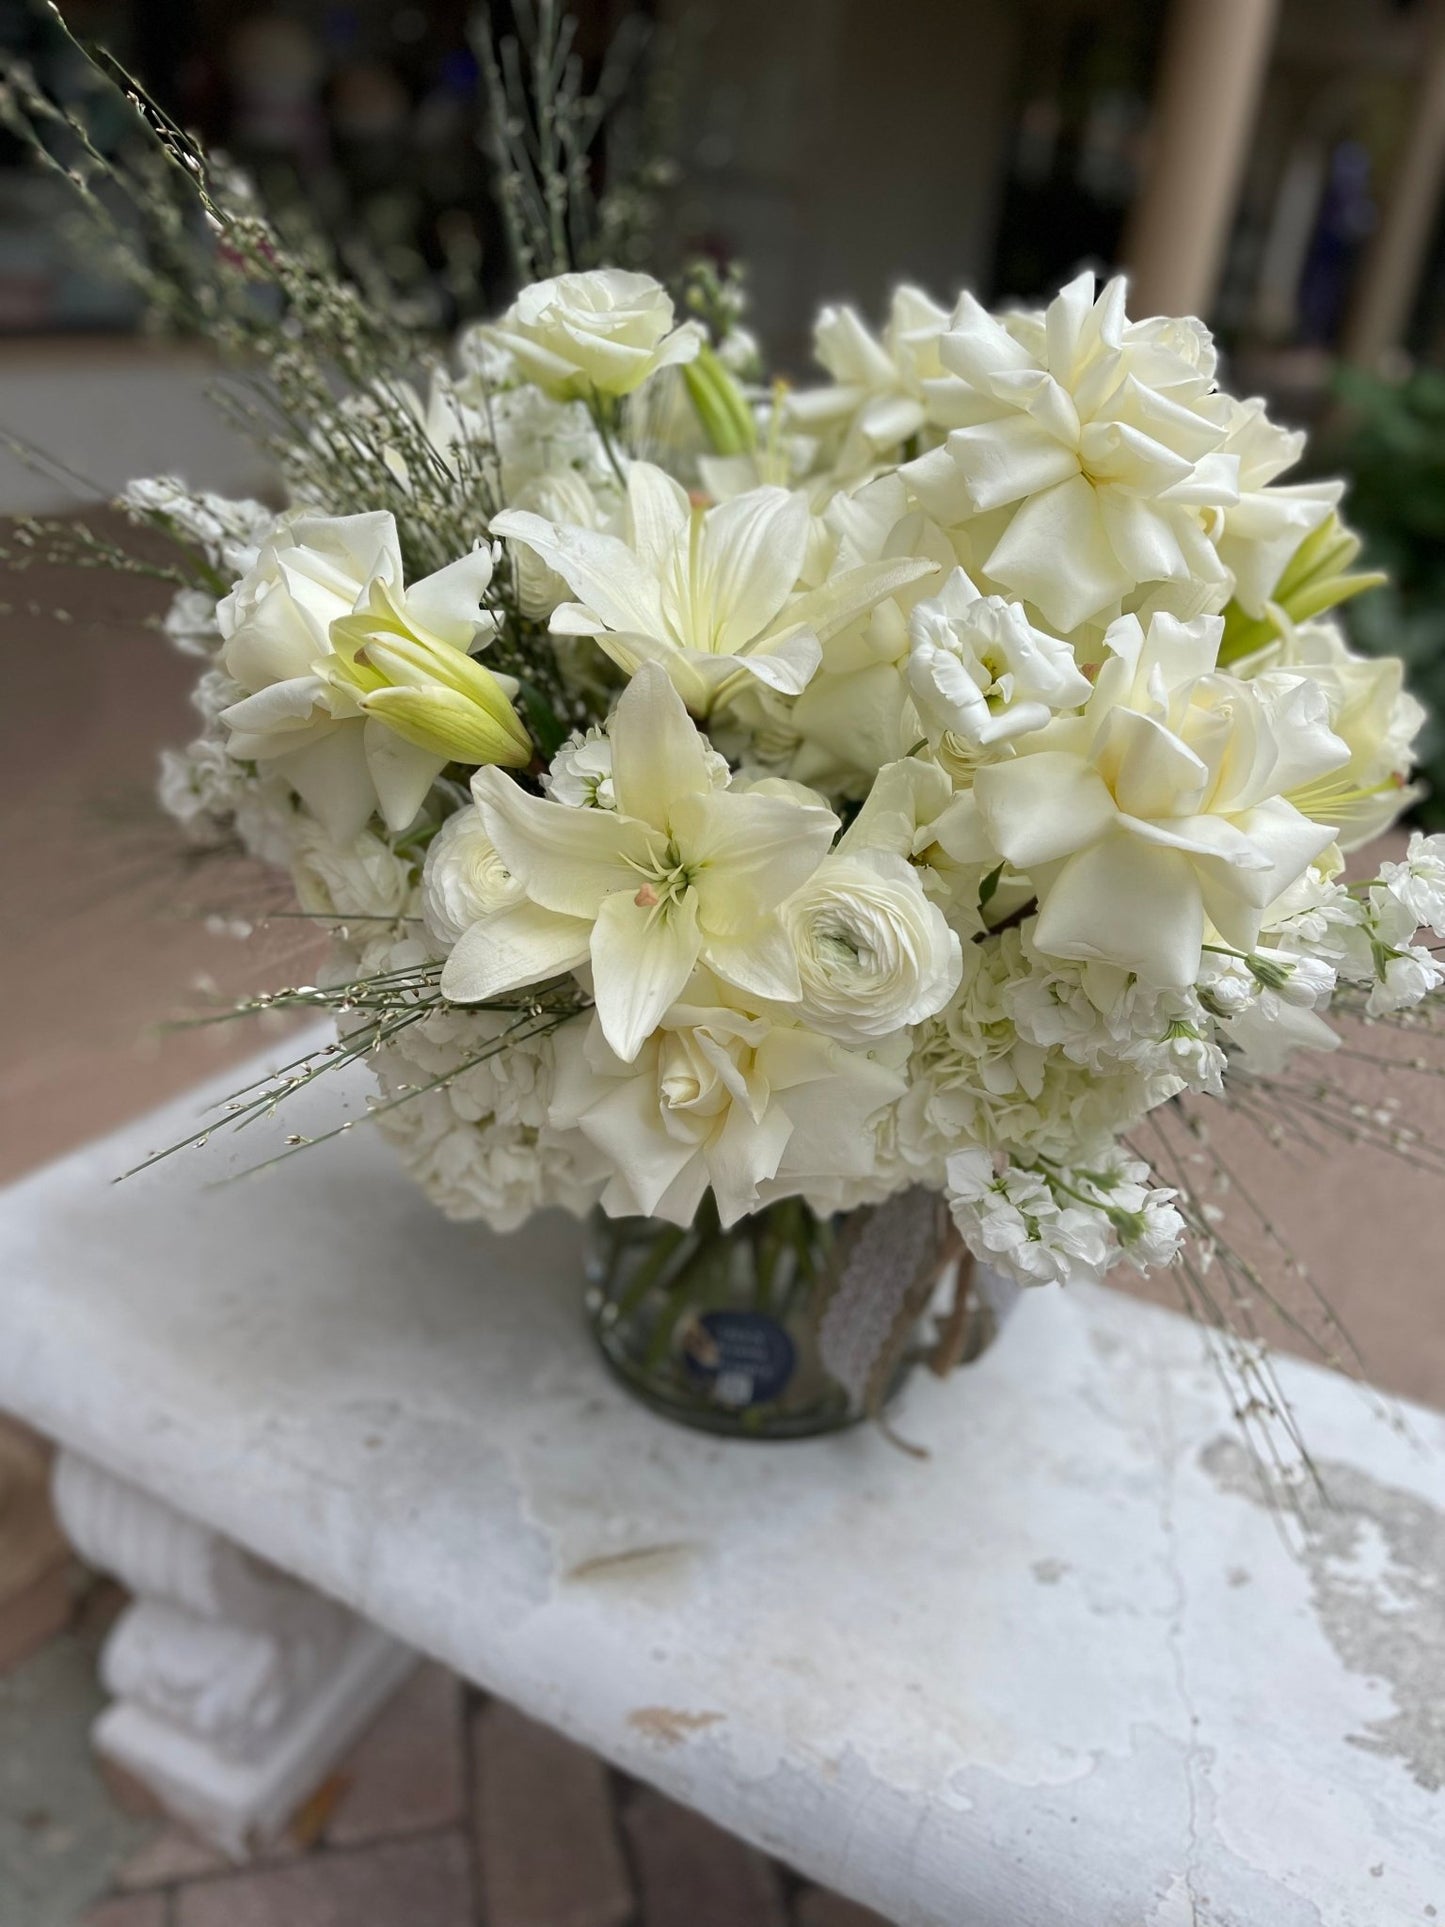 All white flower vase - Lily's Bloom Boutique